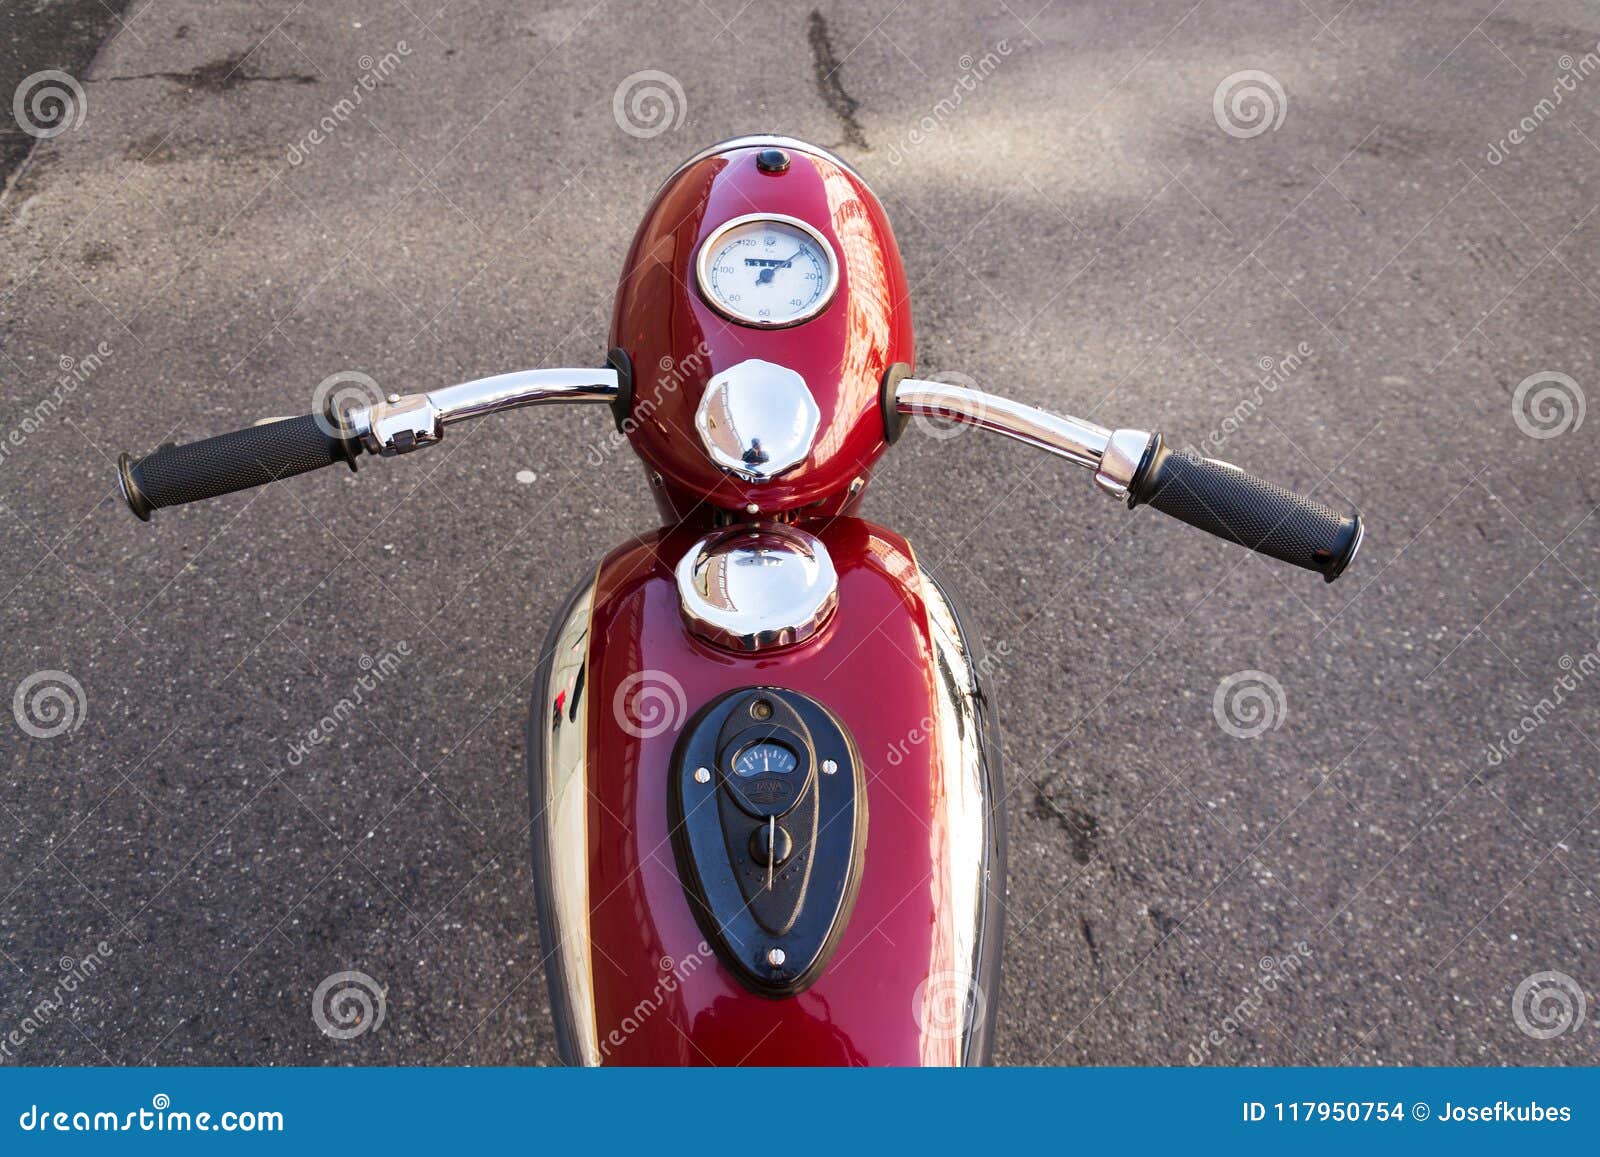 Red Vintage Motorcycle Jawa 125 Produced In Former